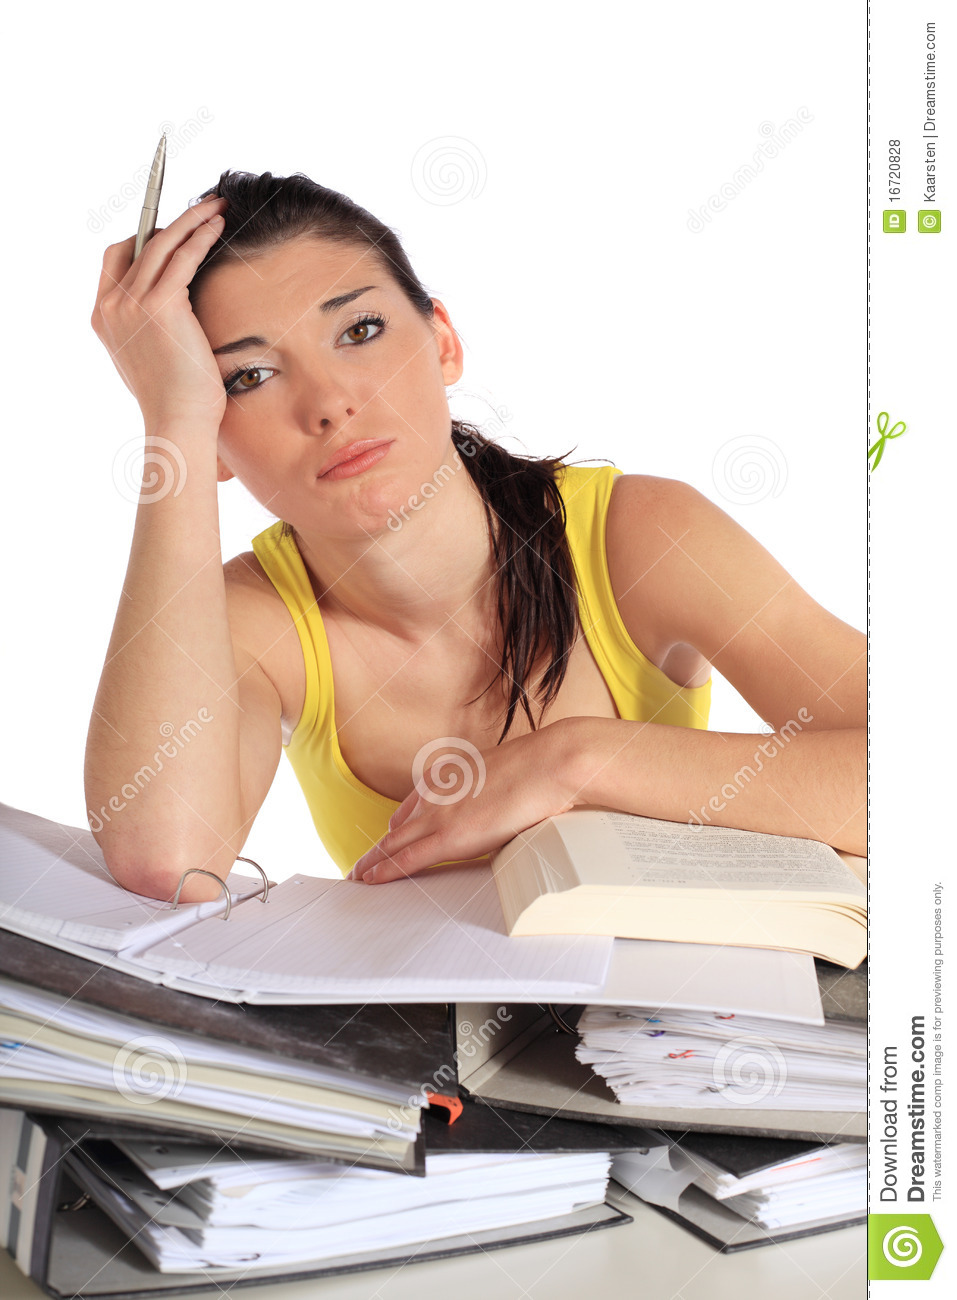 Frustrated Student Royalty Free Stock Photos   Image  16720828